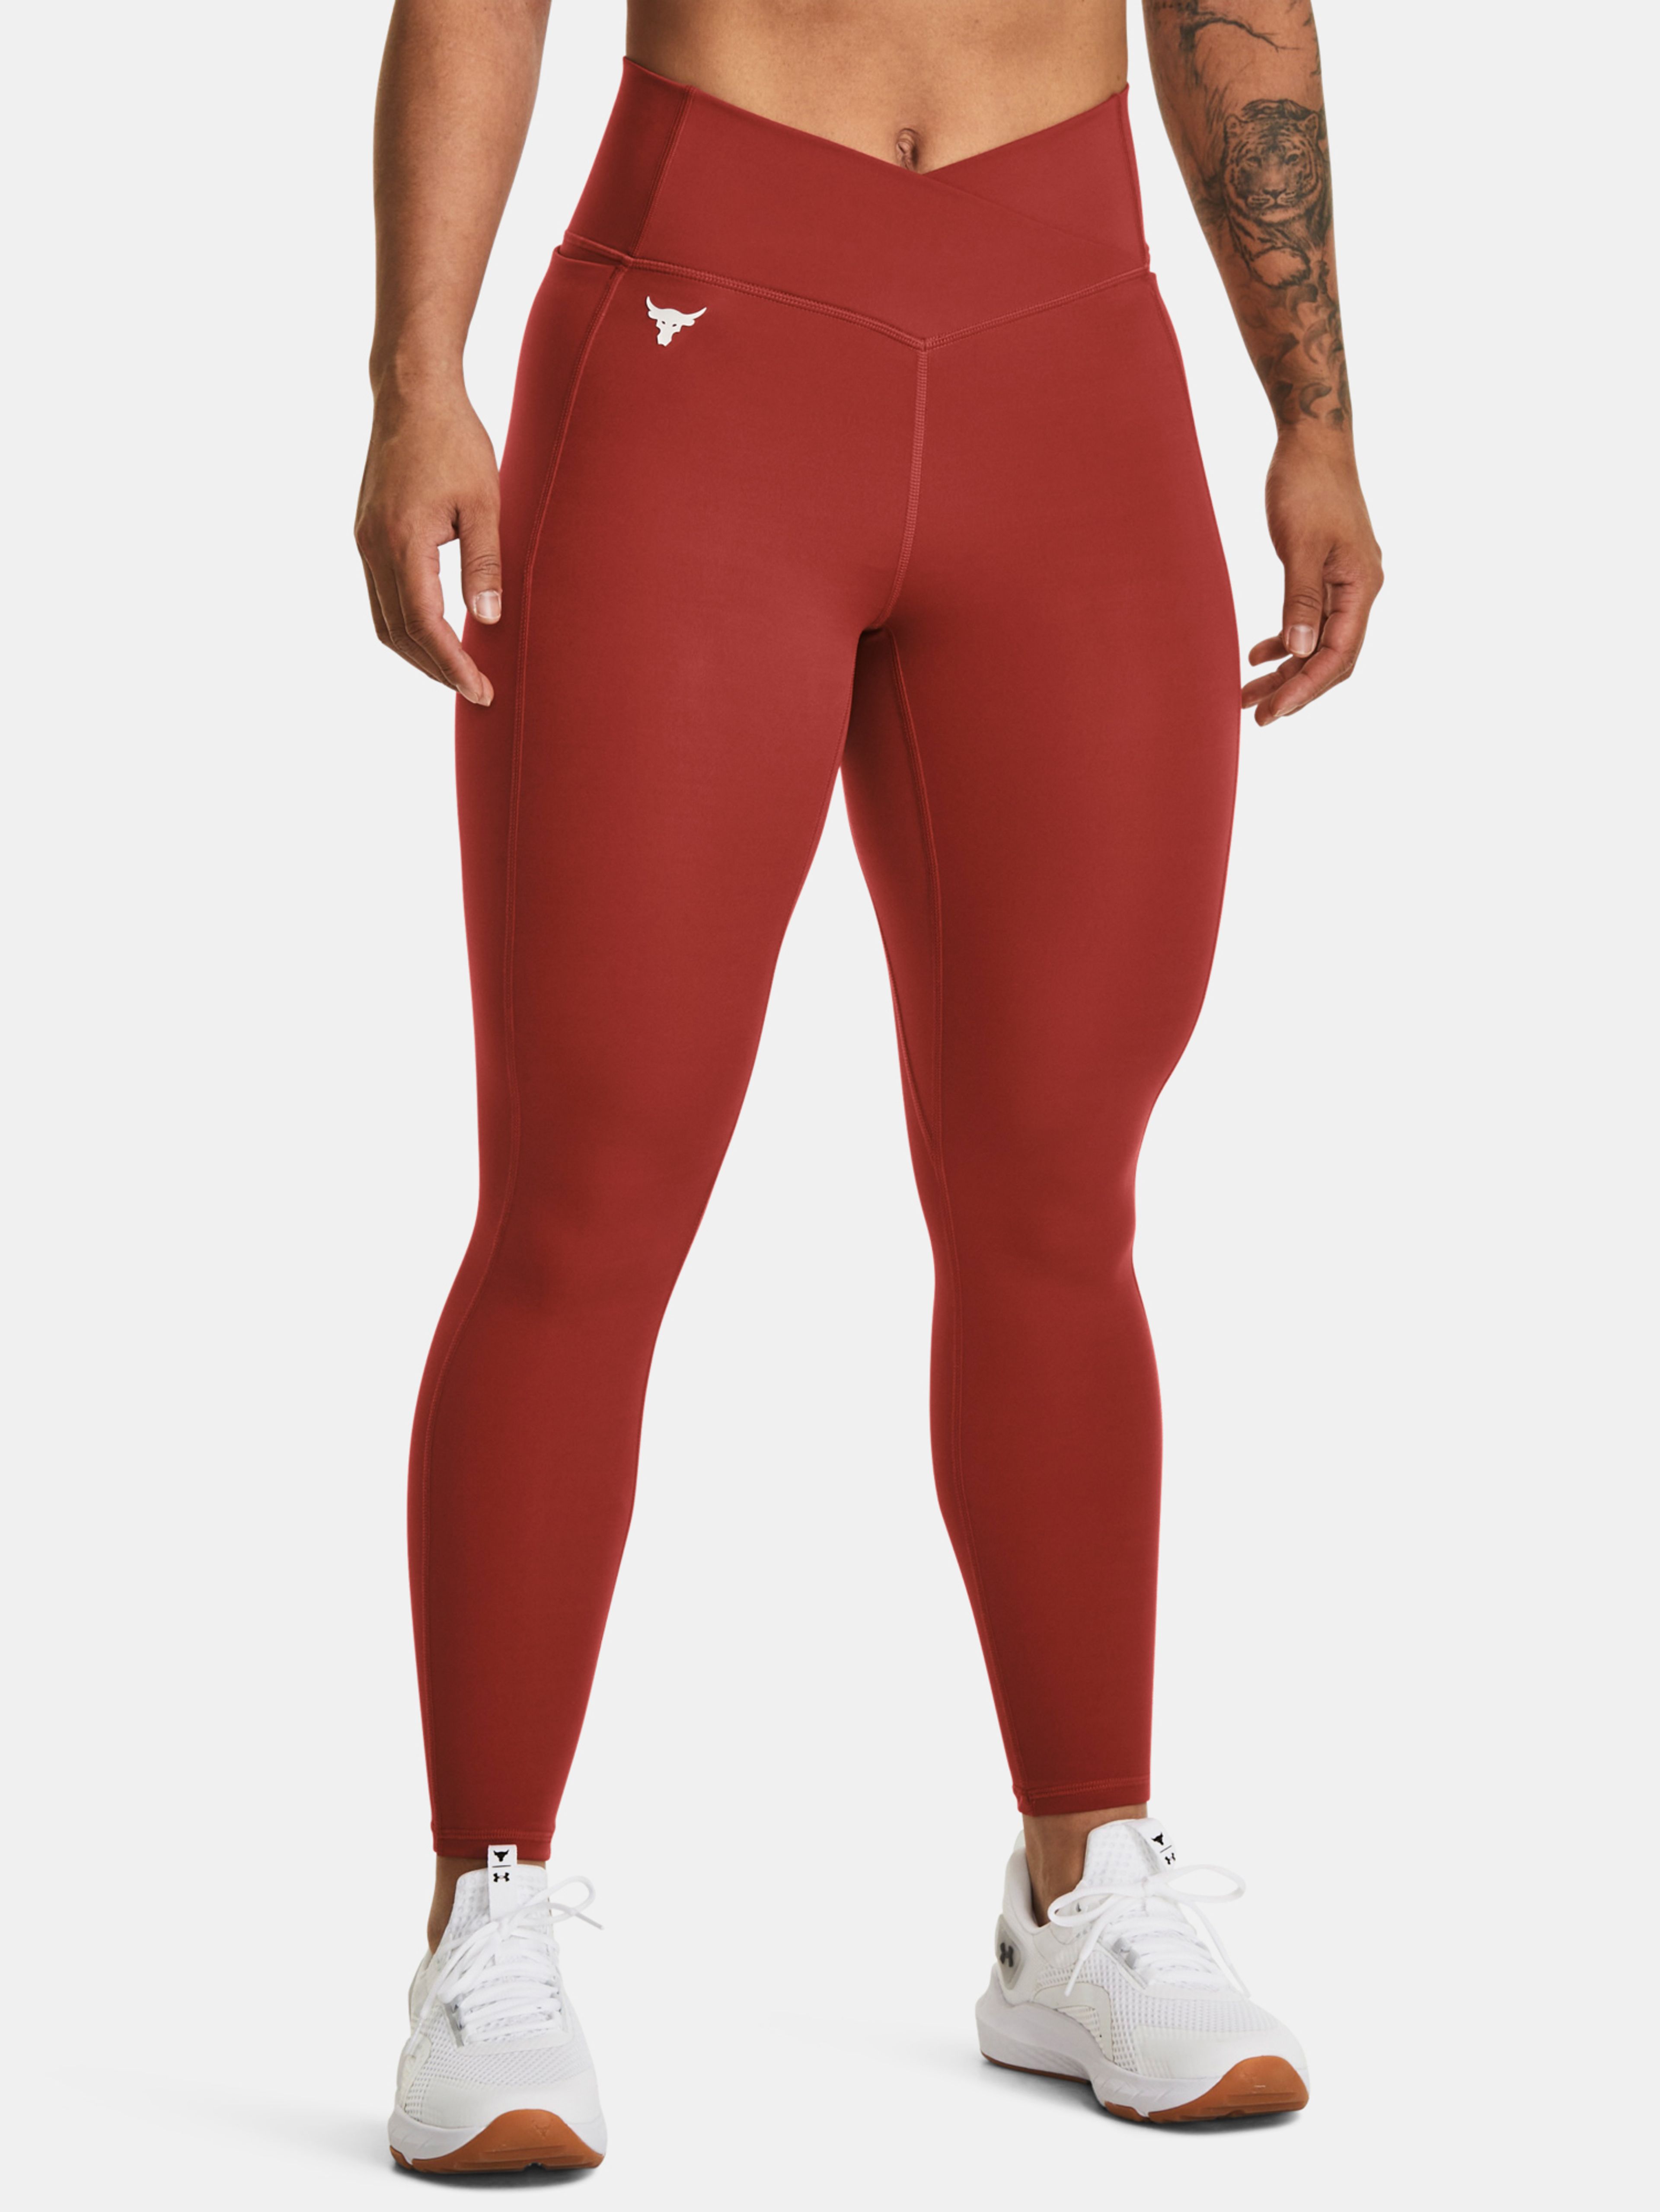 Pajkice Under Armour Pjt Rck LG Crssover Ankl Lg-RED